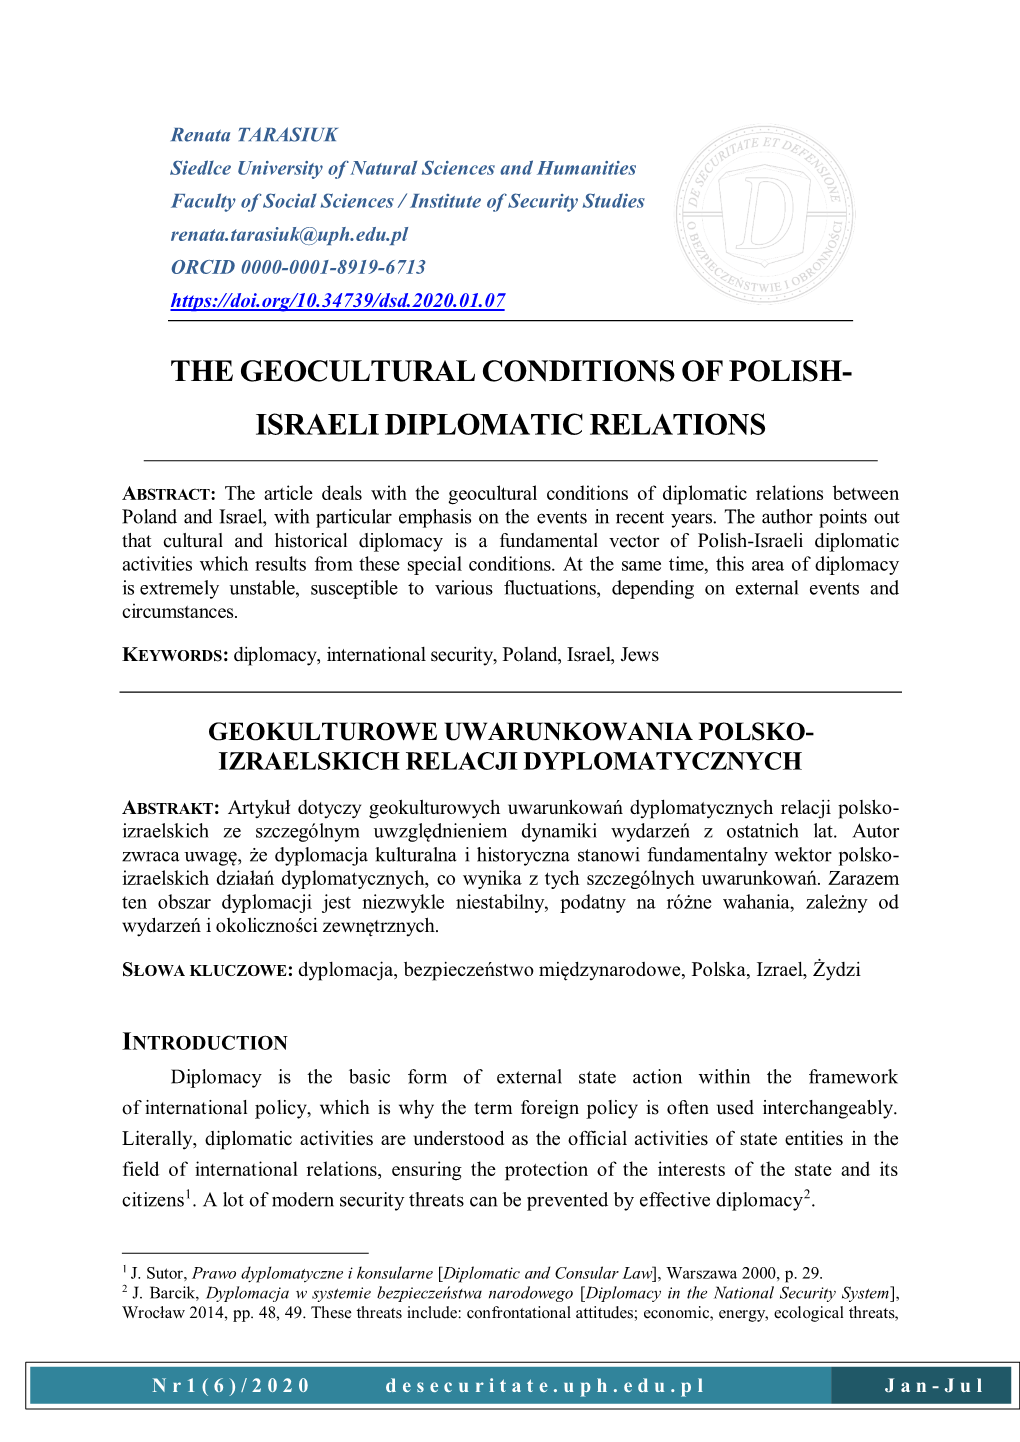 The Geocultural Conditions of Polish-Israeli Diplomatic Relations